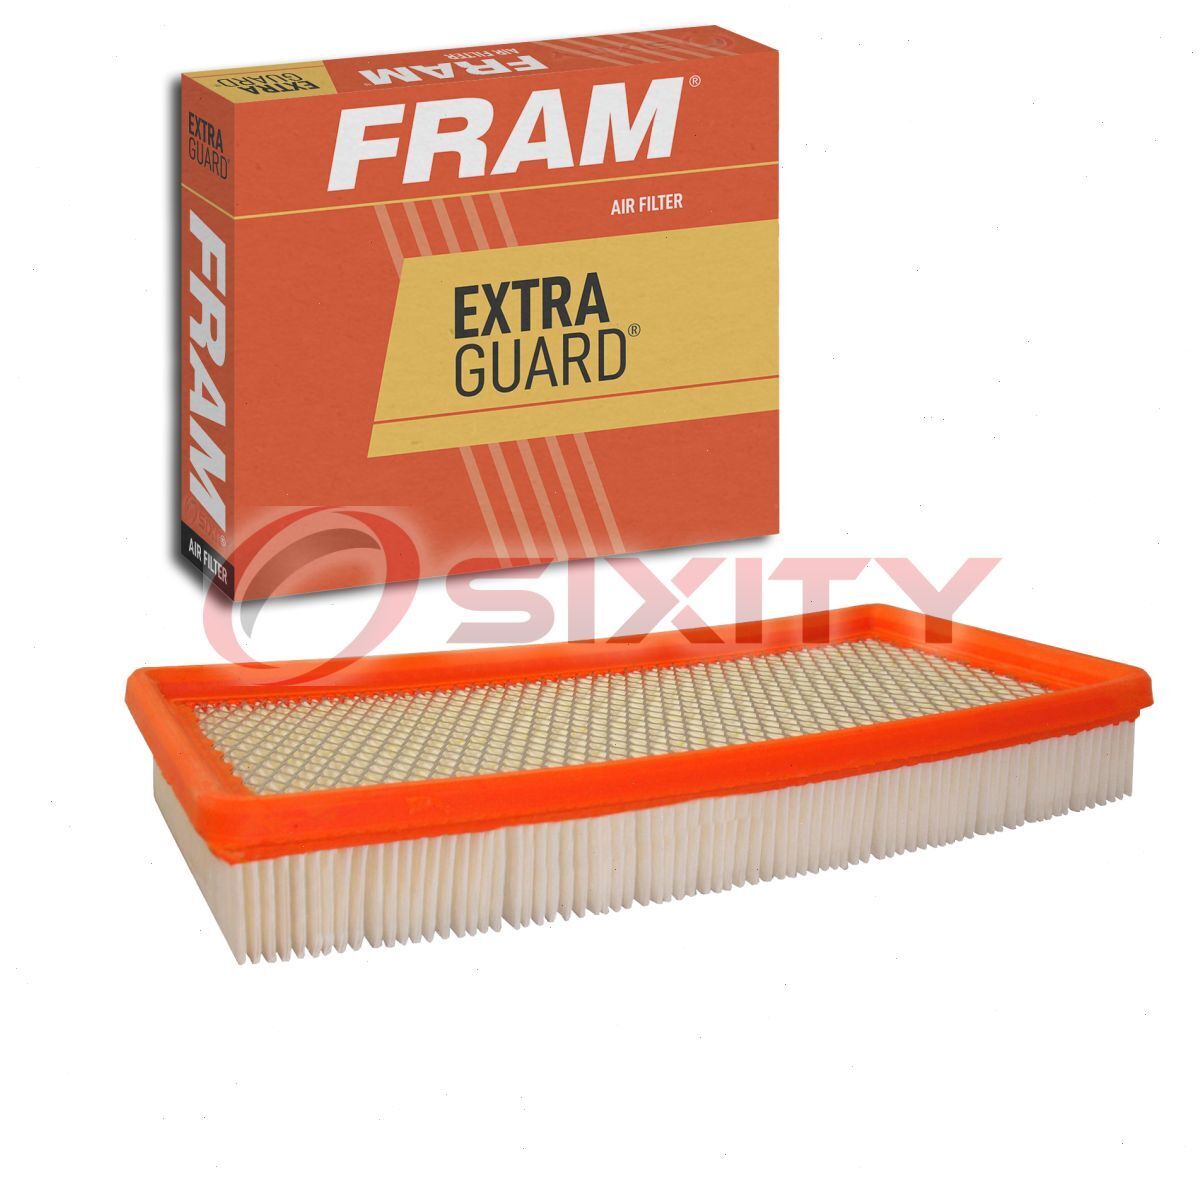 FRAM Extra Guard Air Filter for 1991 GMC Syclone Intake Inlet Manifold Fuel wq